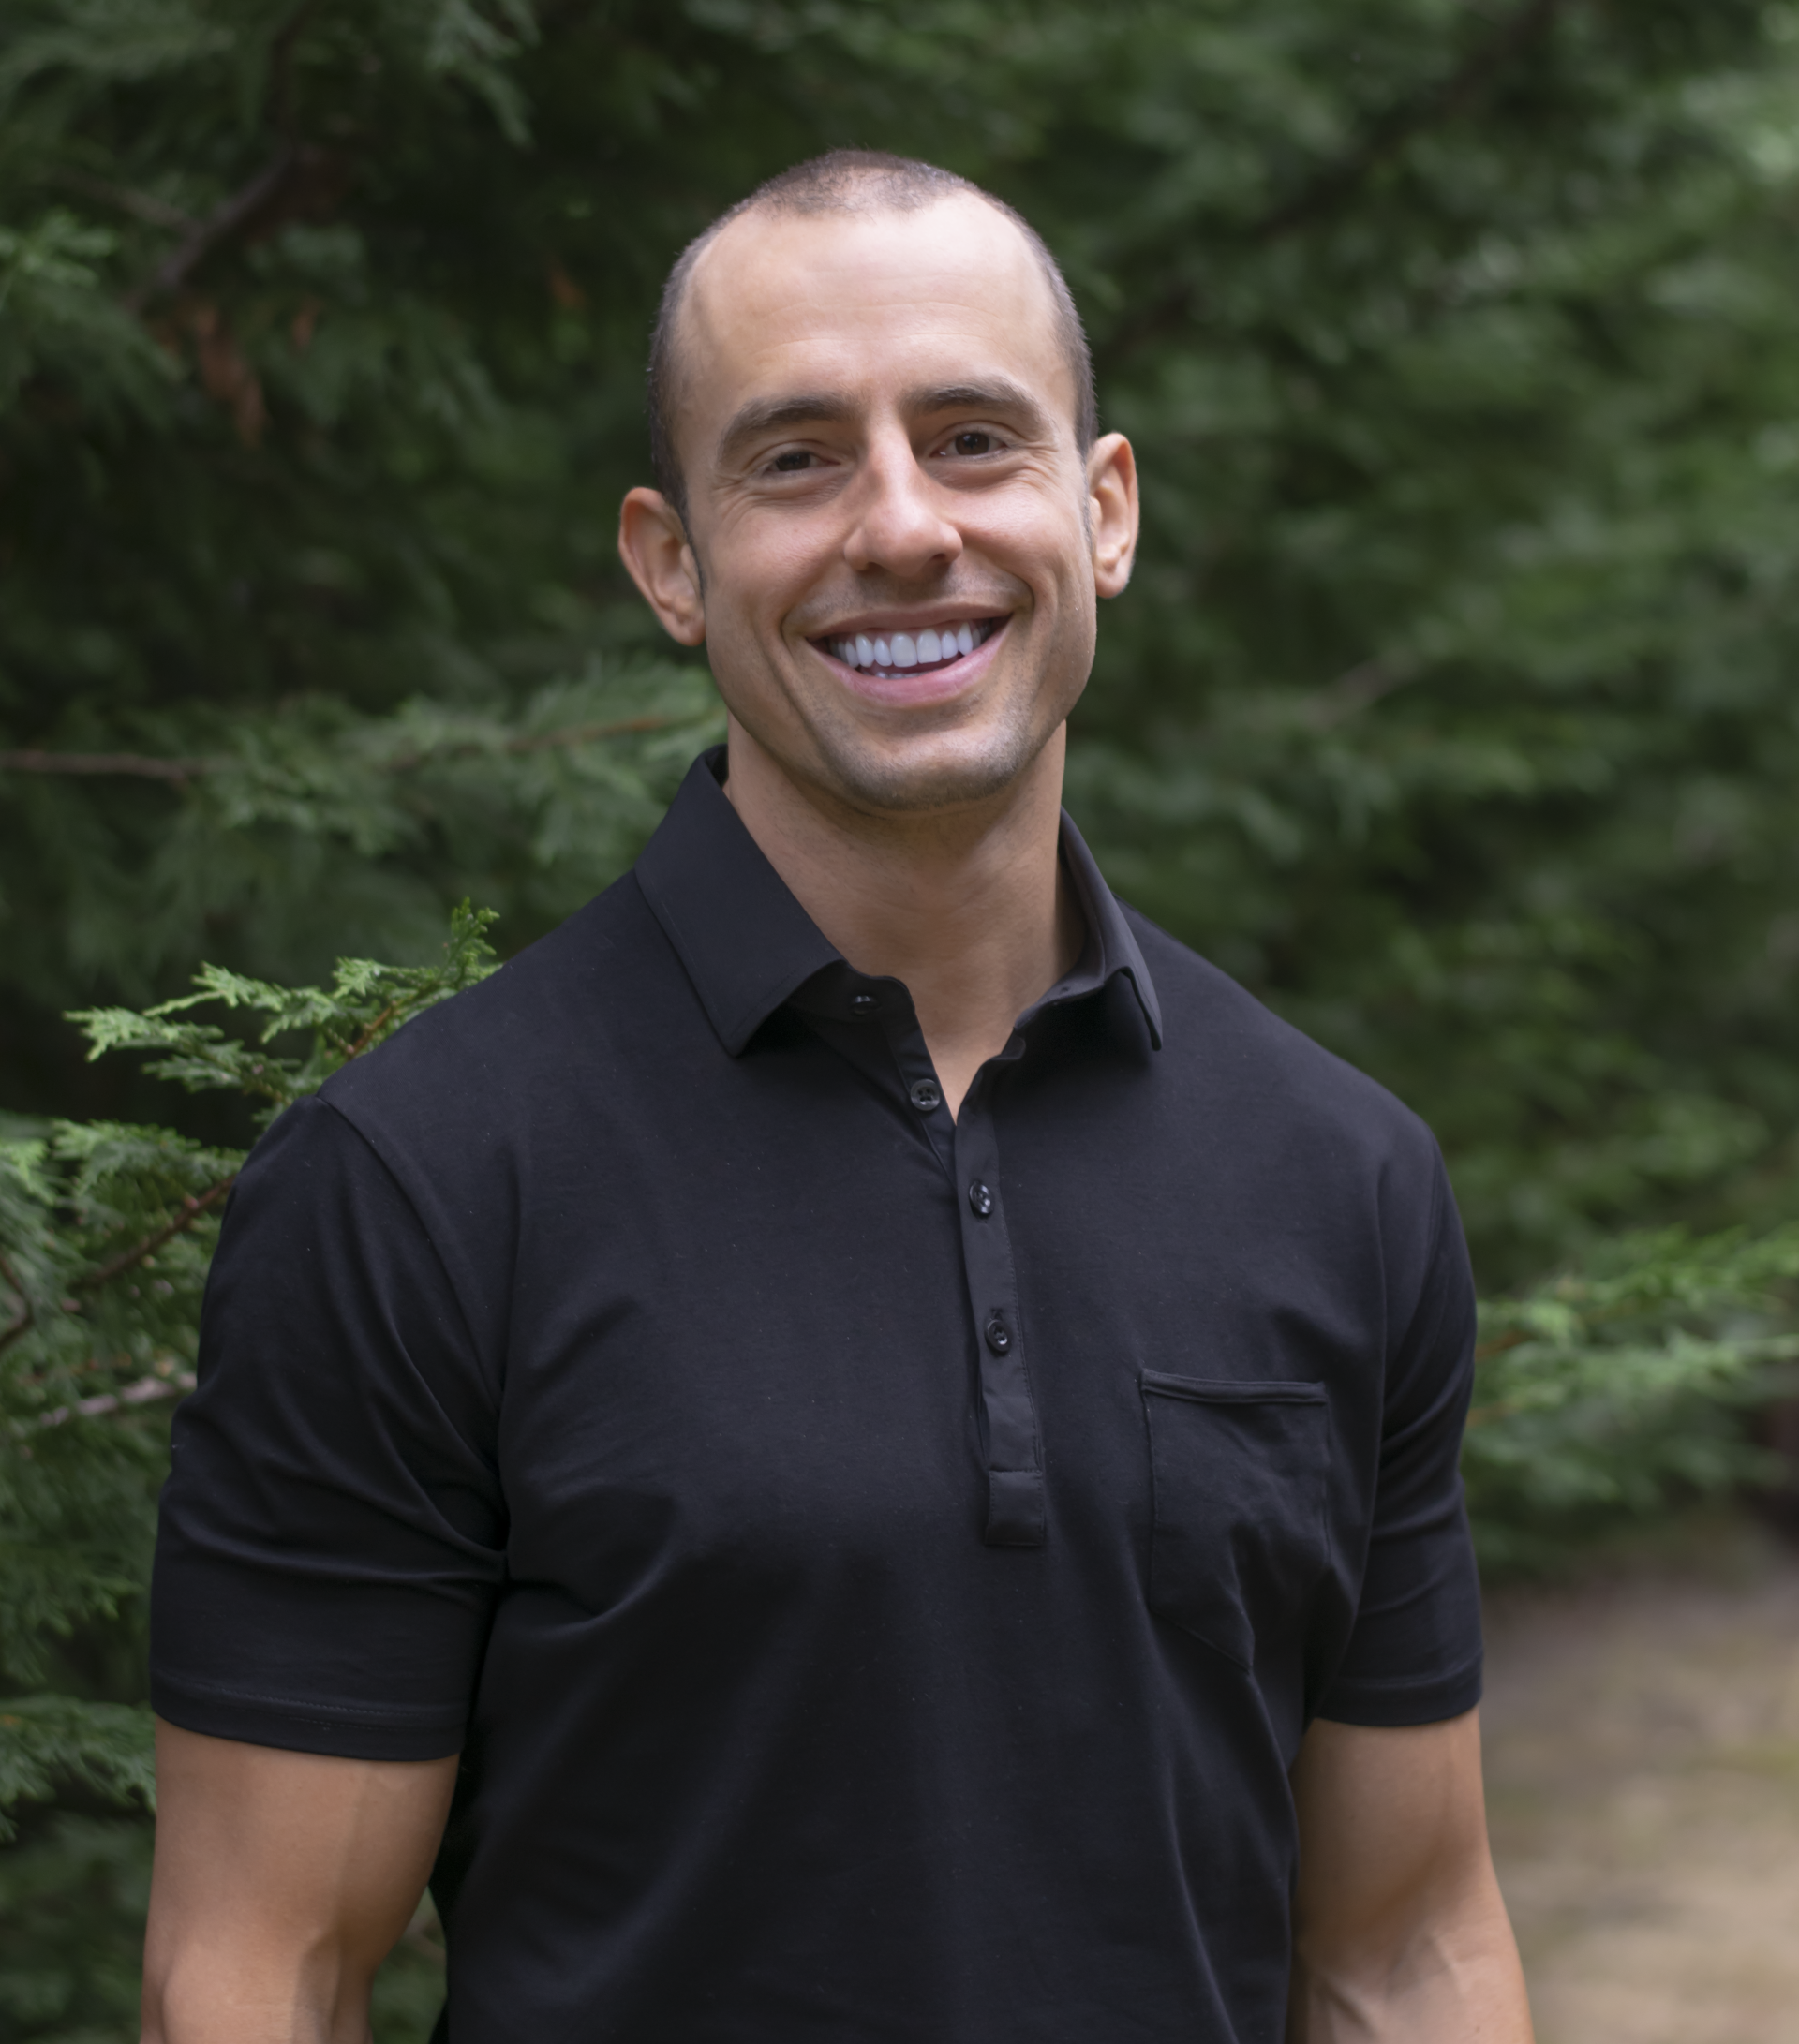 Best-Selling Author and Founder Jonathan Bailor “Its about quality… not quantity; You are high-quality and therefore deserve higher-quality nutrition, self-talk, sleep, sex, relationships, and health.” by Alexandra Spirer Authority Magazine 